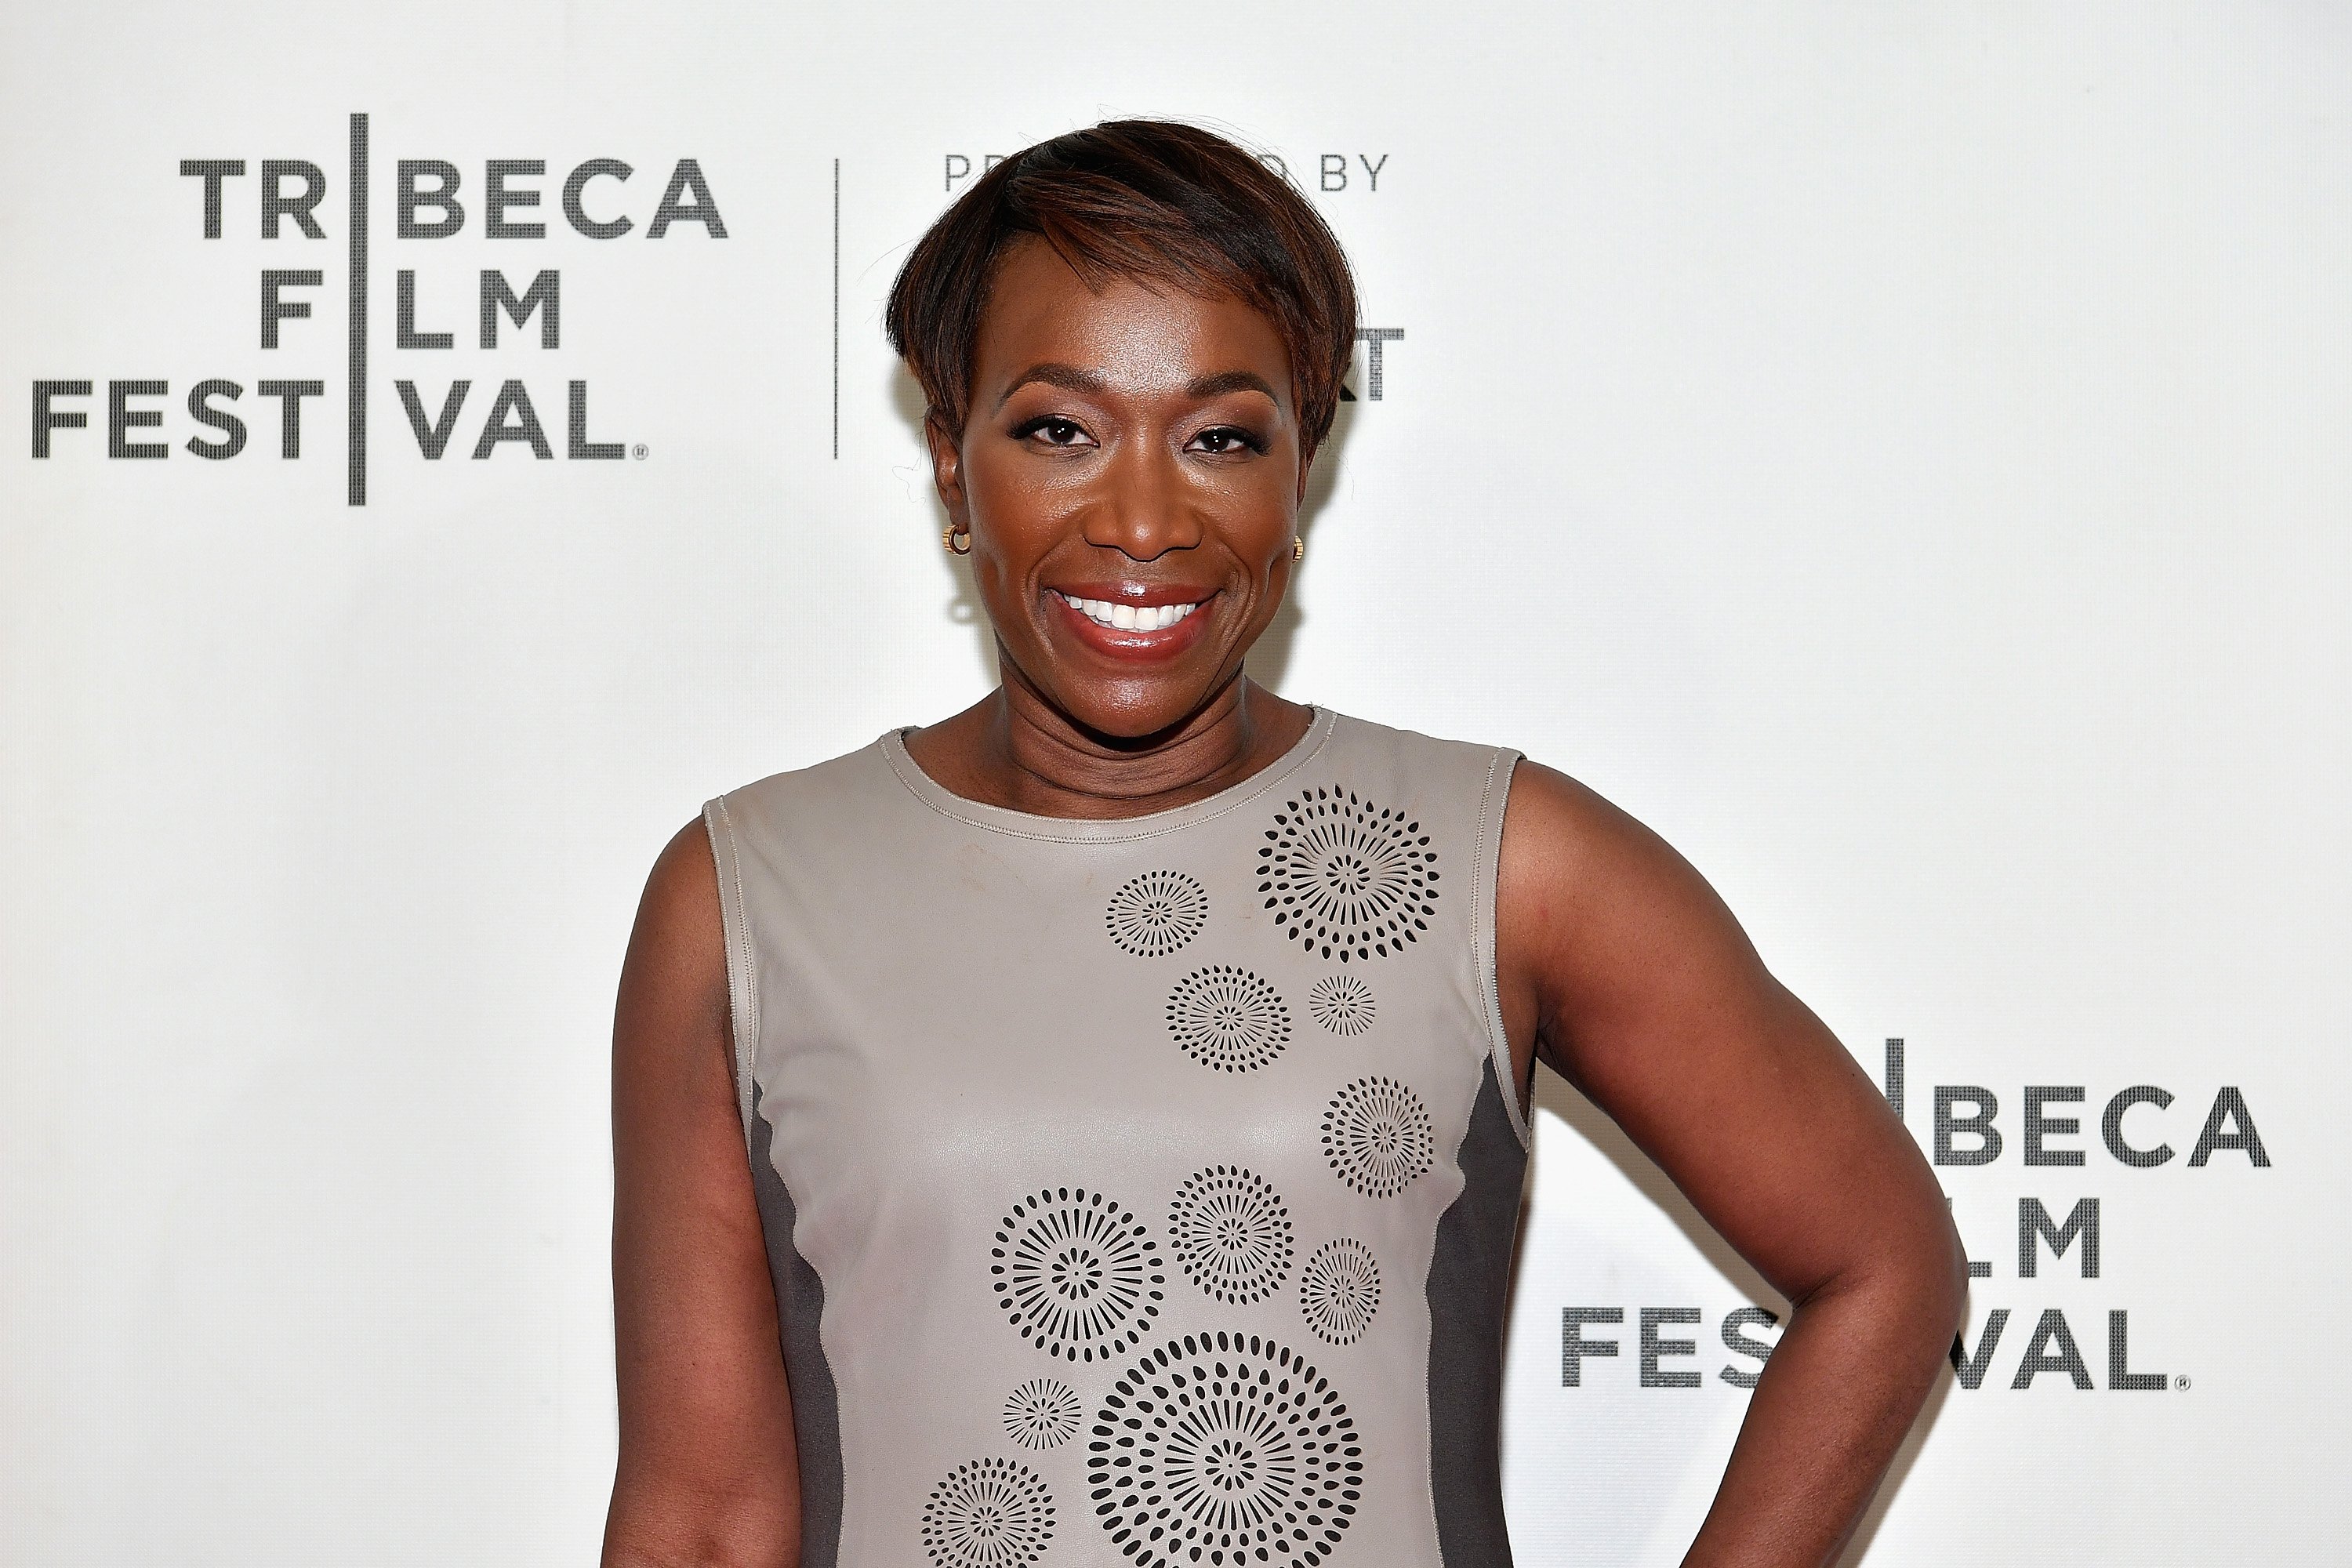 Joy Reid was allegedly pressured into dropping a story about rape allegations by NBC News. (Dia Dipasupil/Getty Images for Tribeca Film Festival)